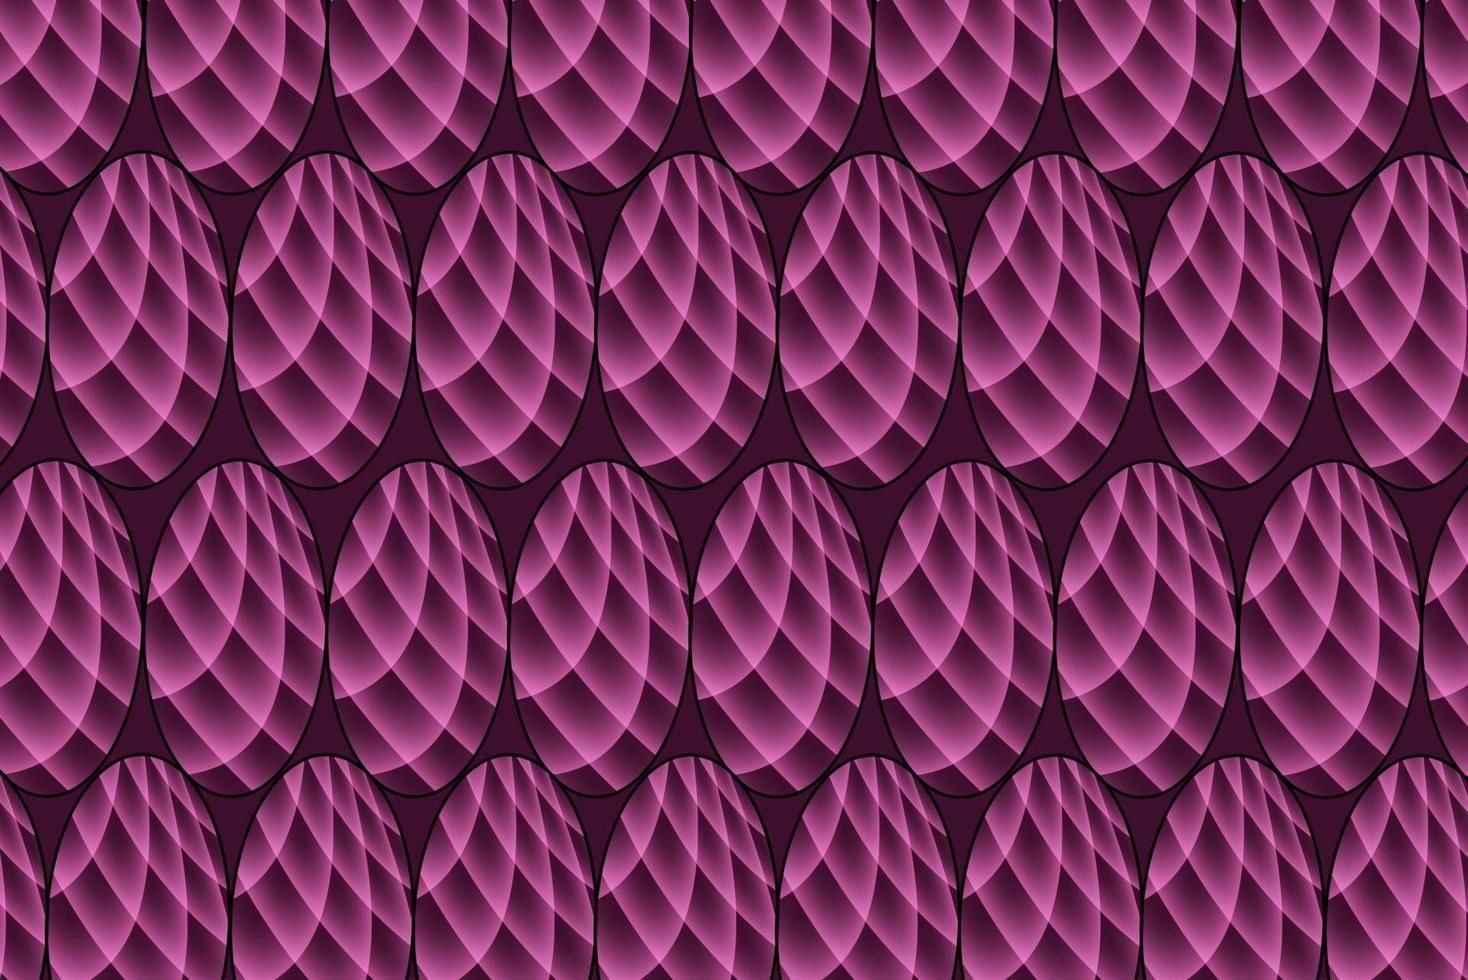 Pink attern background abstract. purple seamless background vector